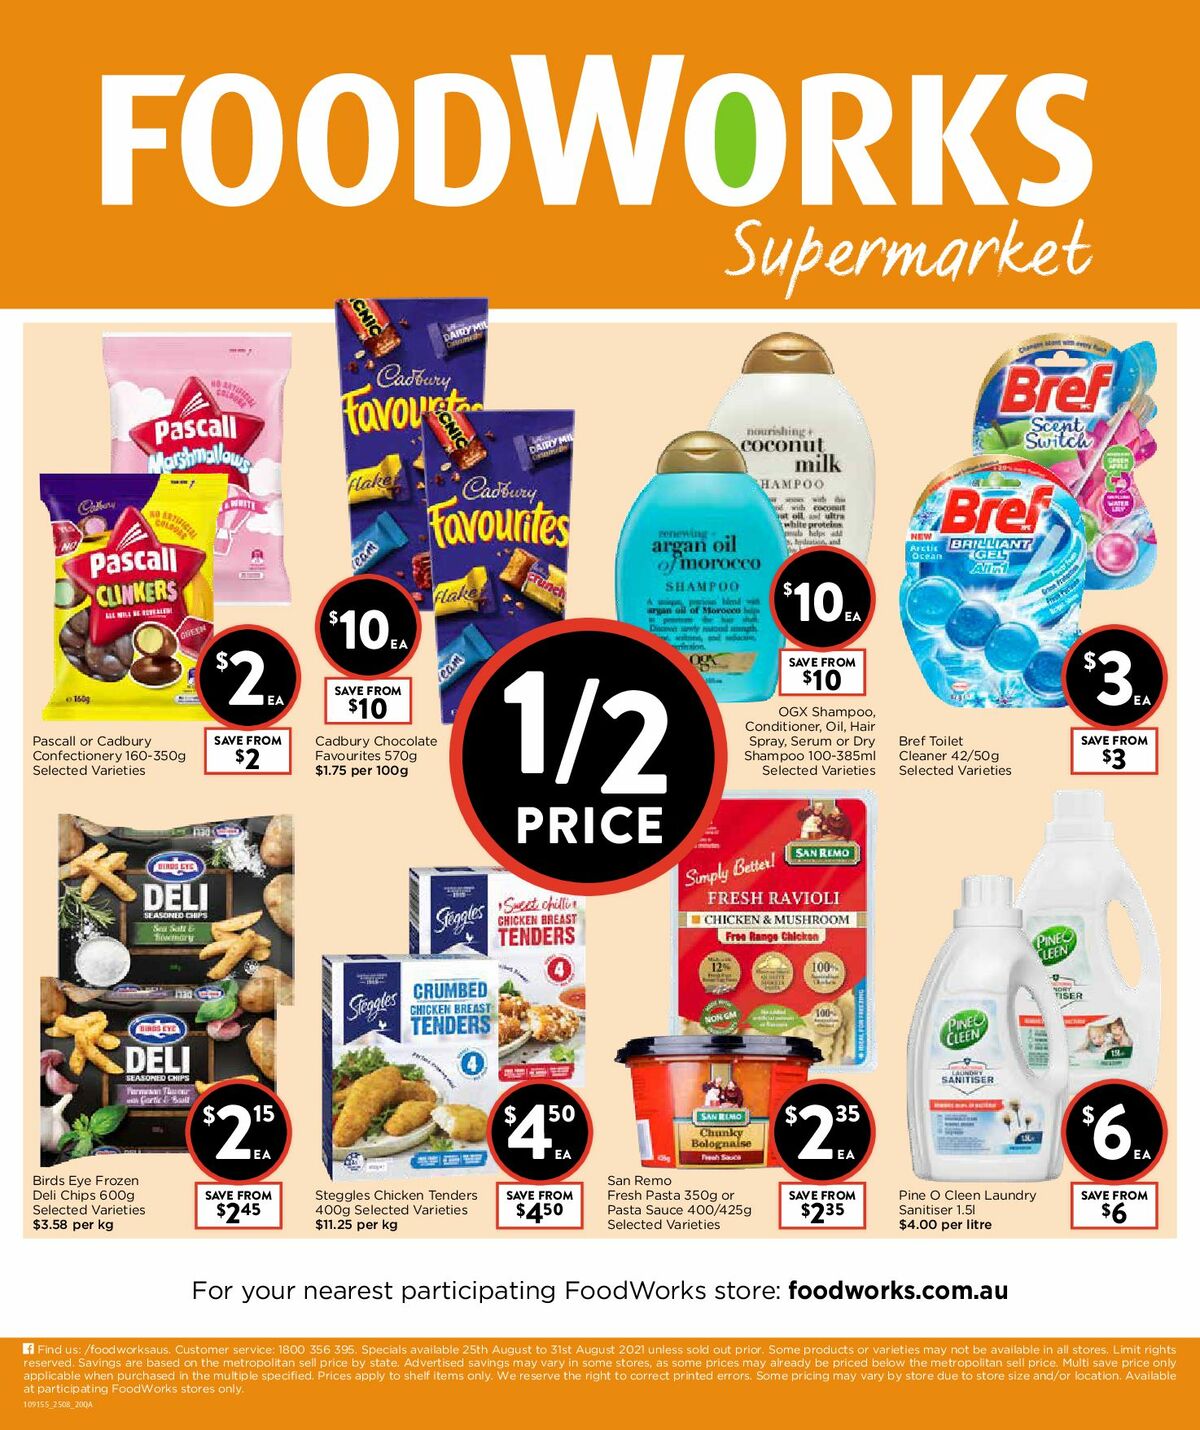 FoodWorks Supermarket Catalogues from 25 August